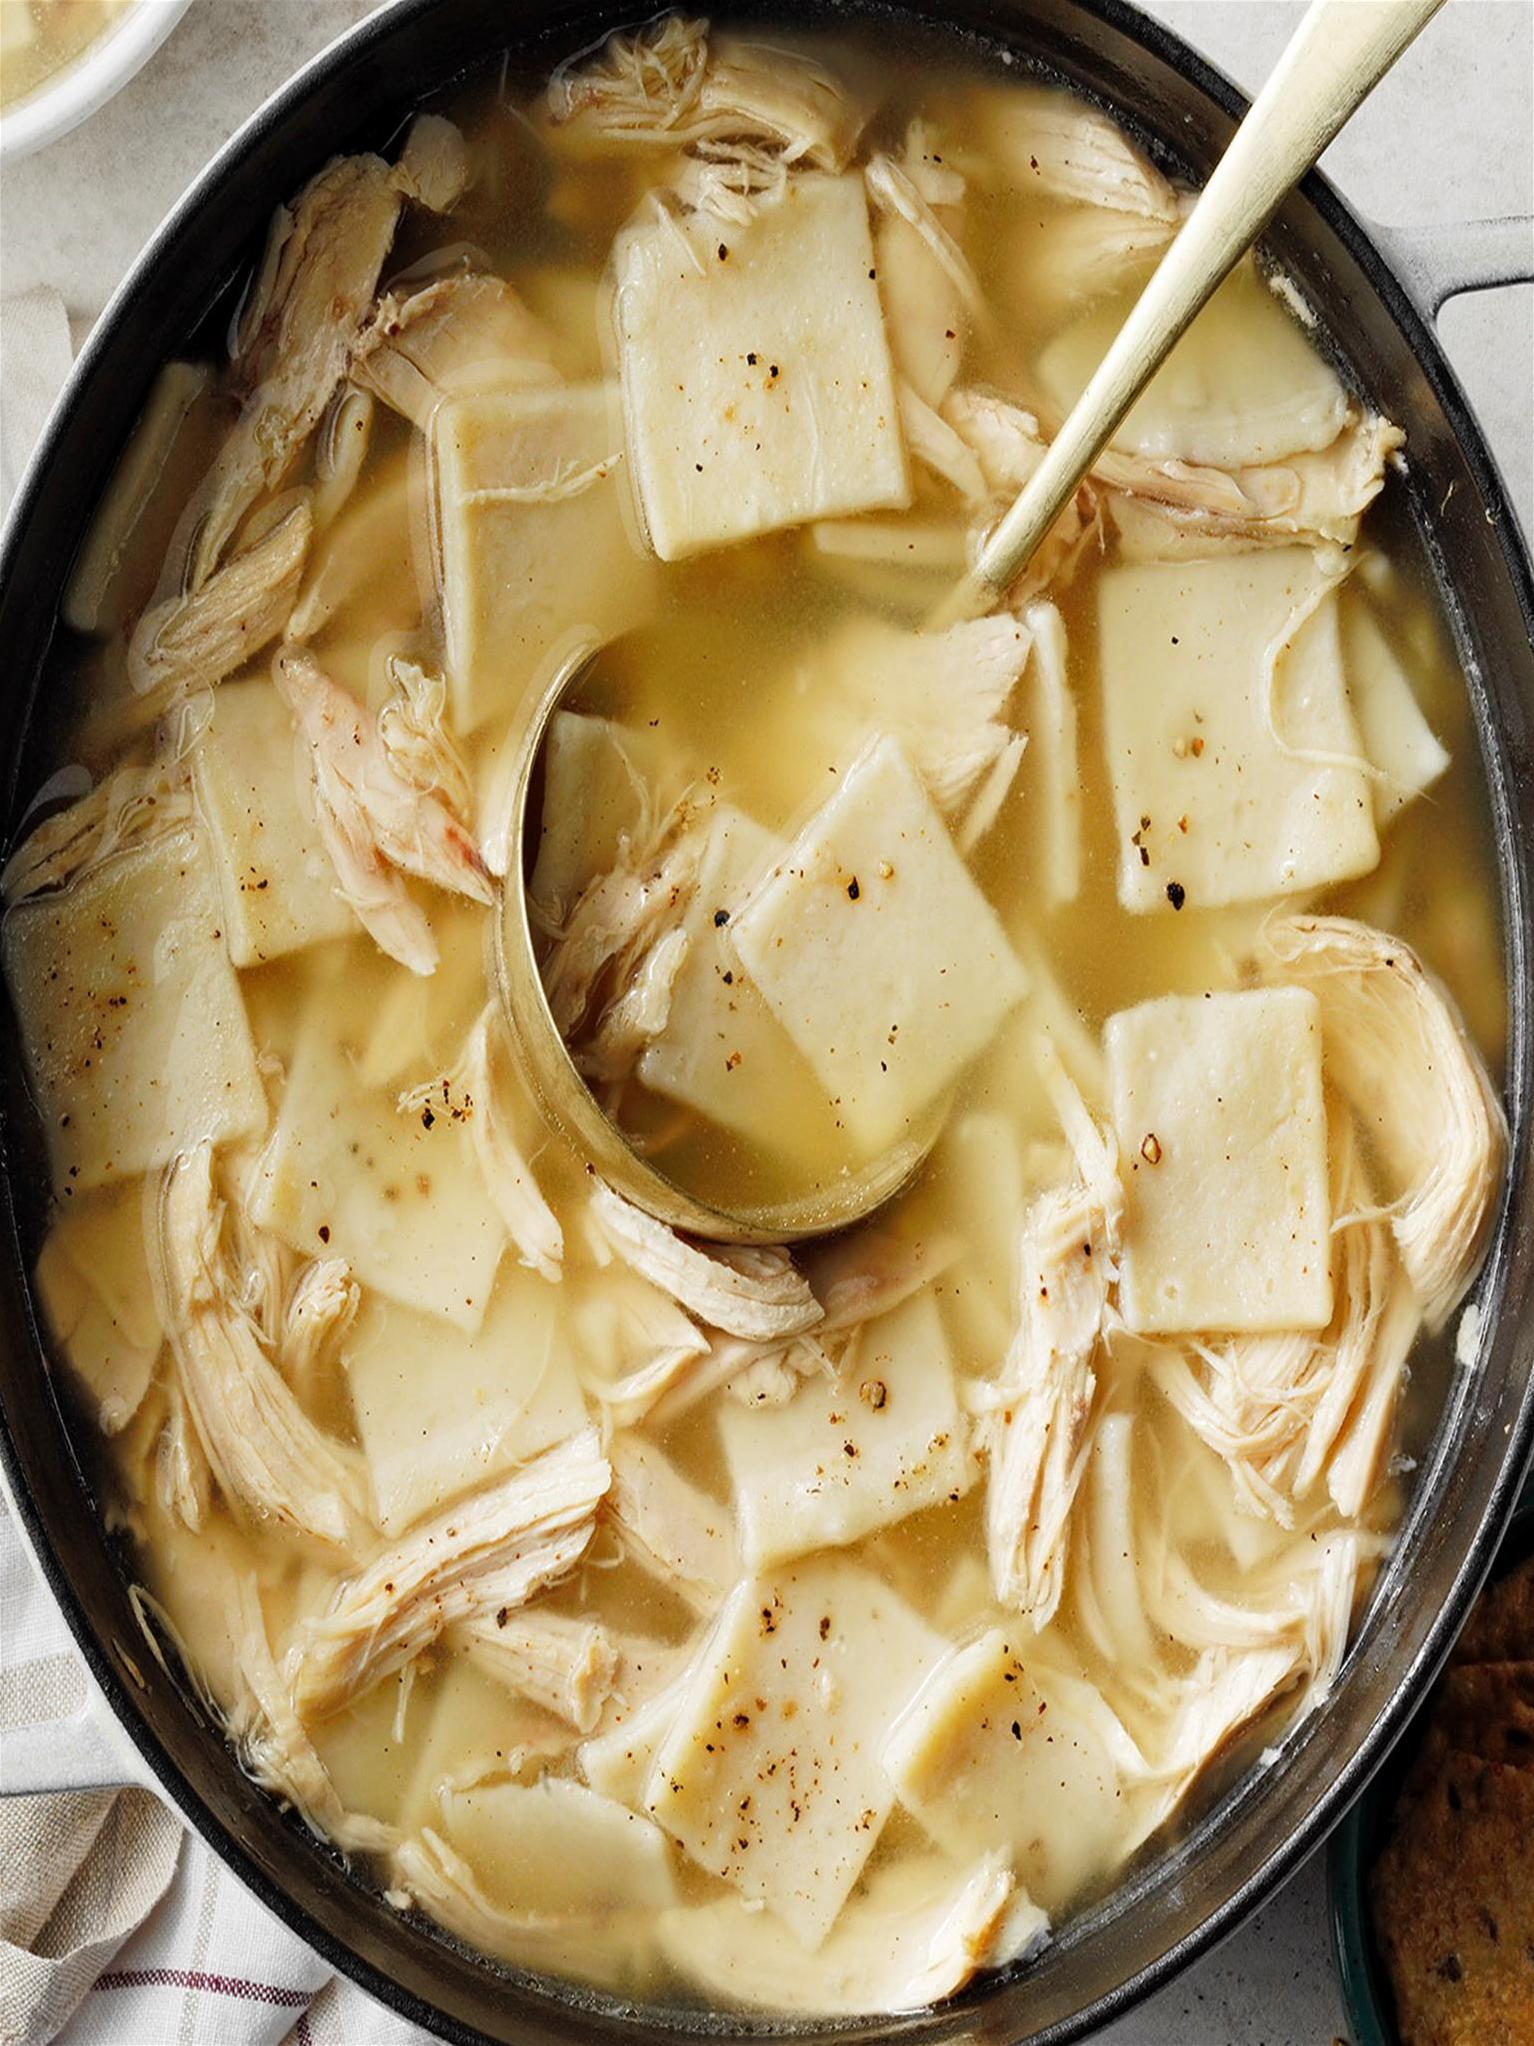  Make sure to use plenty of butter and milk to get these dumplings just right